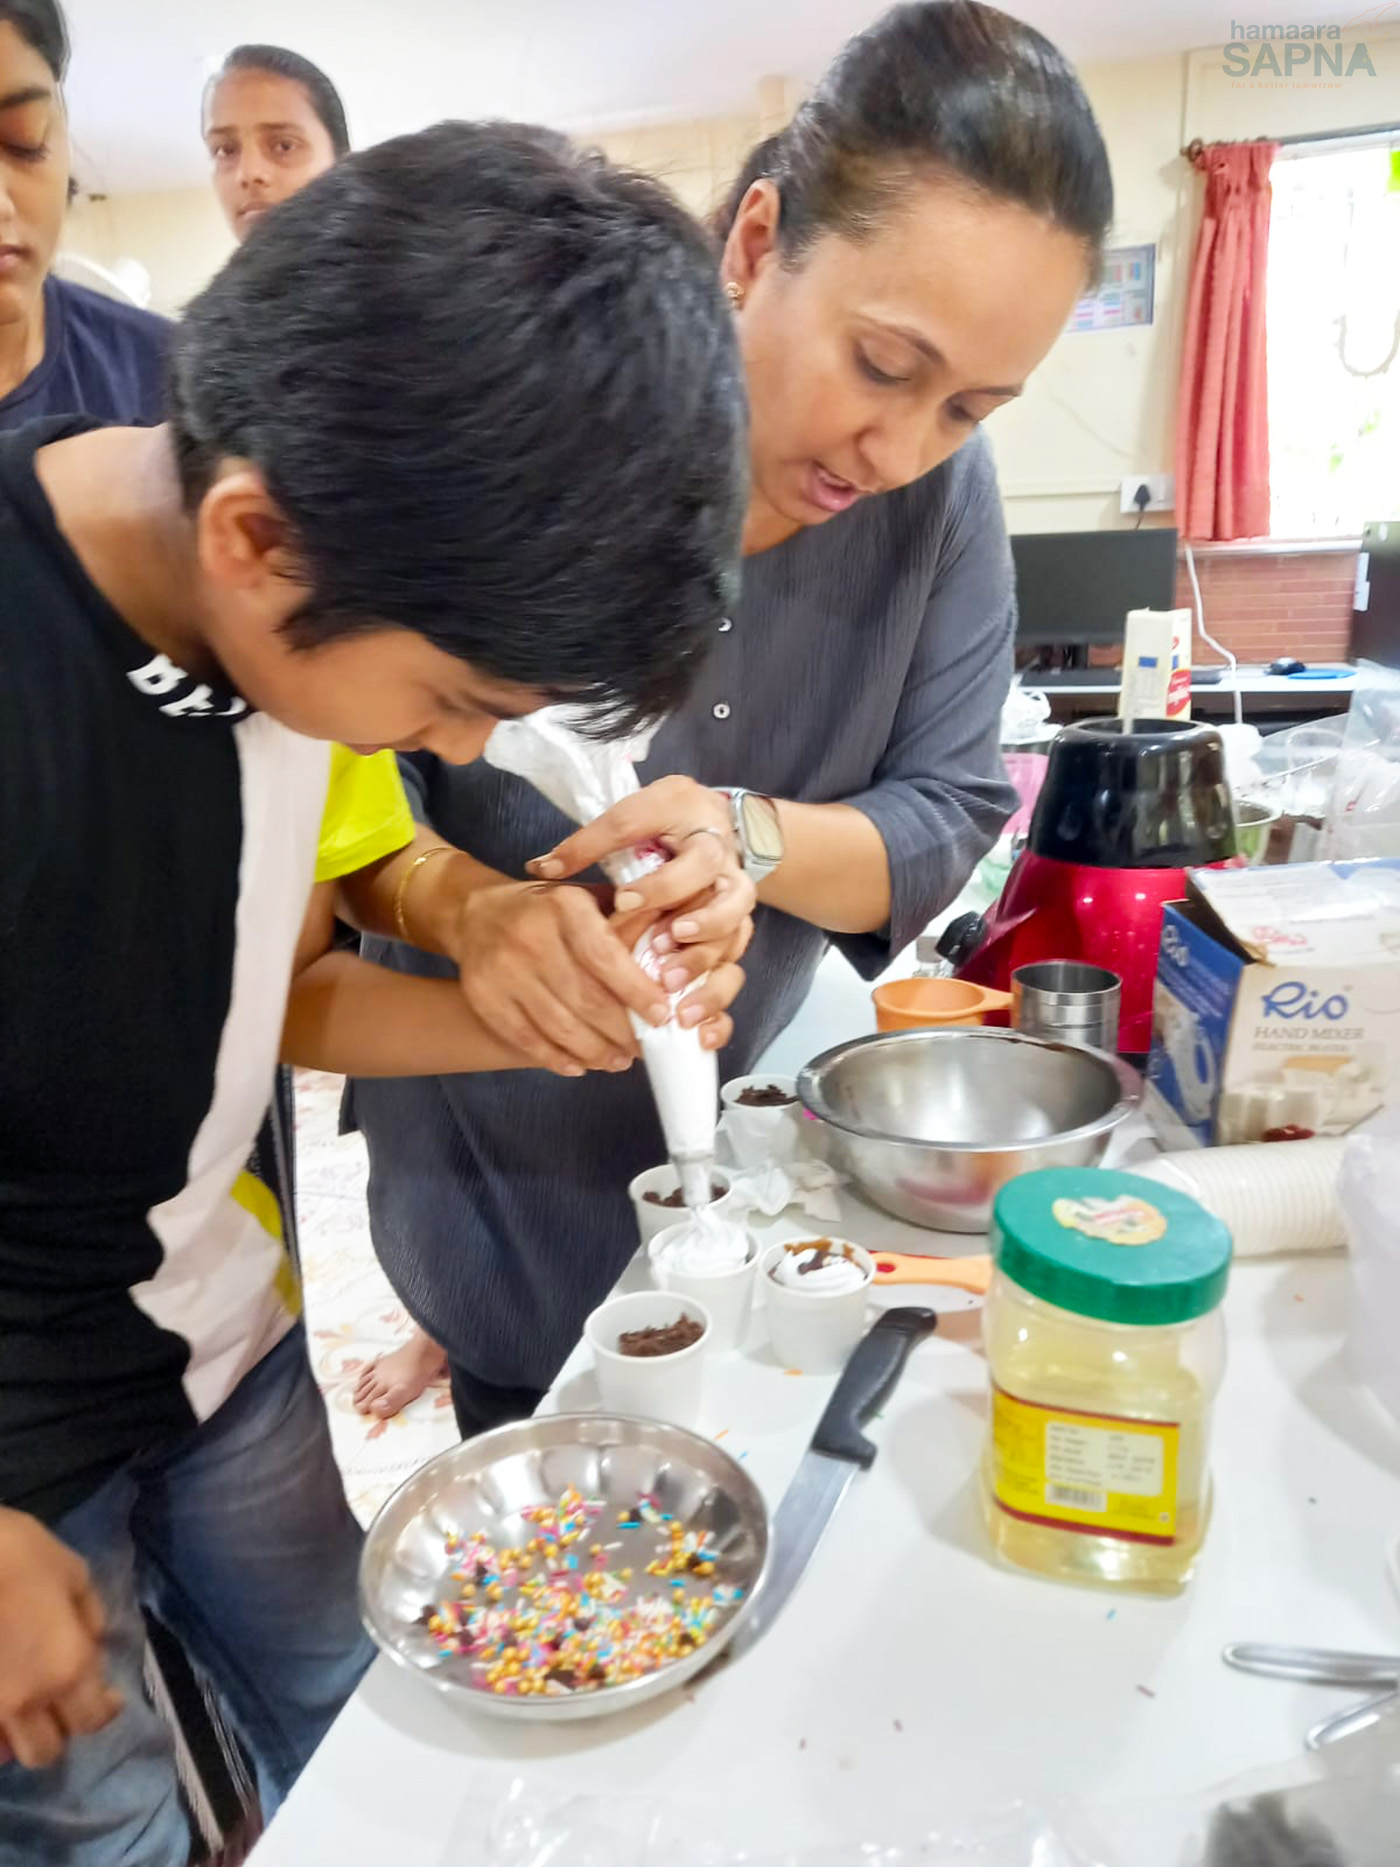 Little chefs in action: Our enthusiastic kids diving into the world of cupcake making, sprinkling joy and creativity in every batter-filled moment.